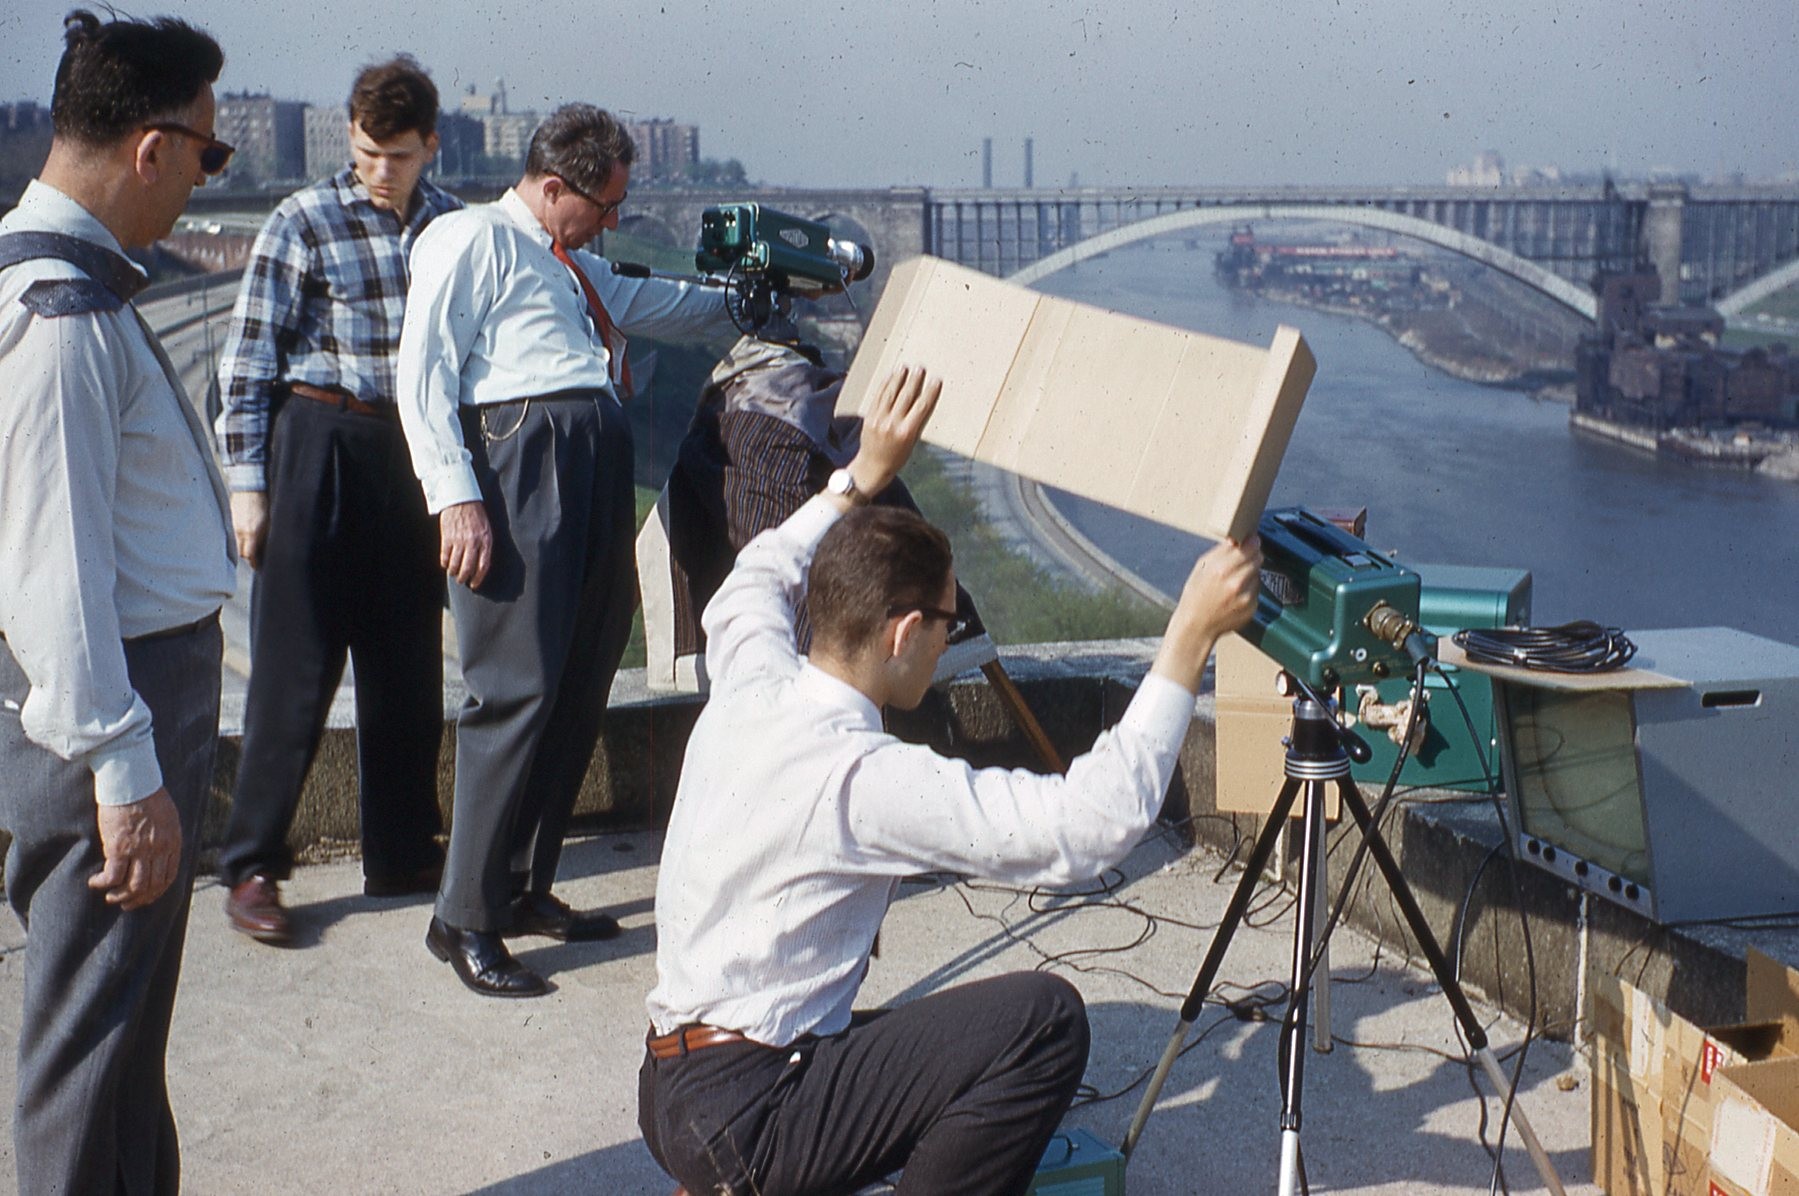 4 men standing on a rooftop looking at 1950's TV cameras with distant river and bridge in the background.